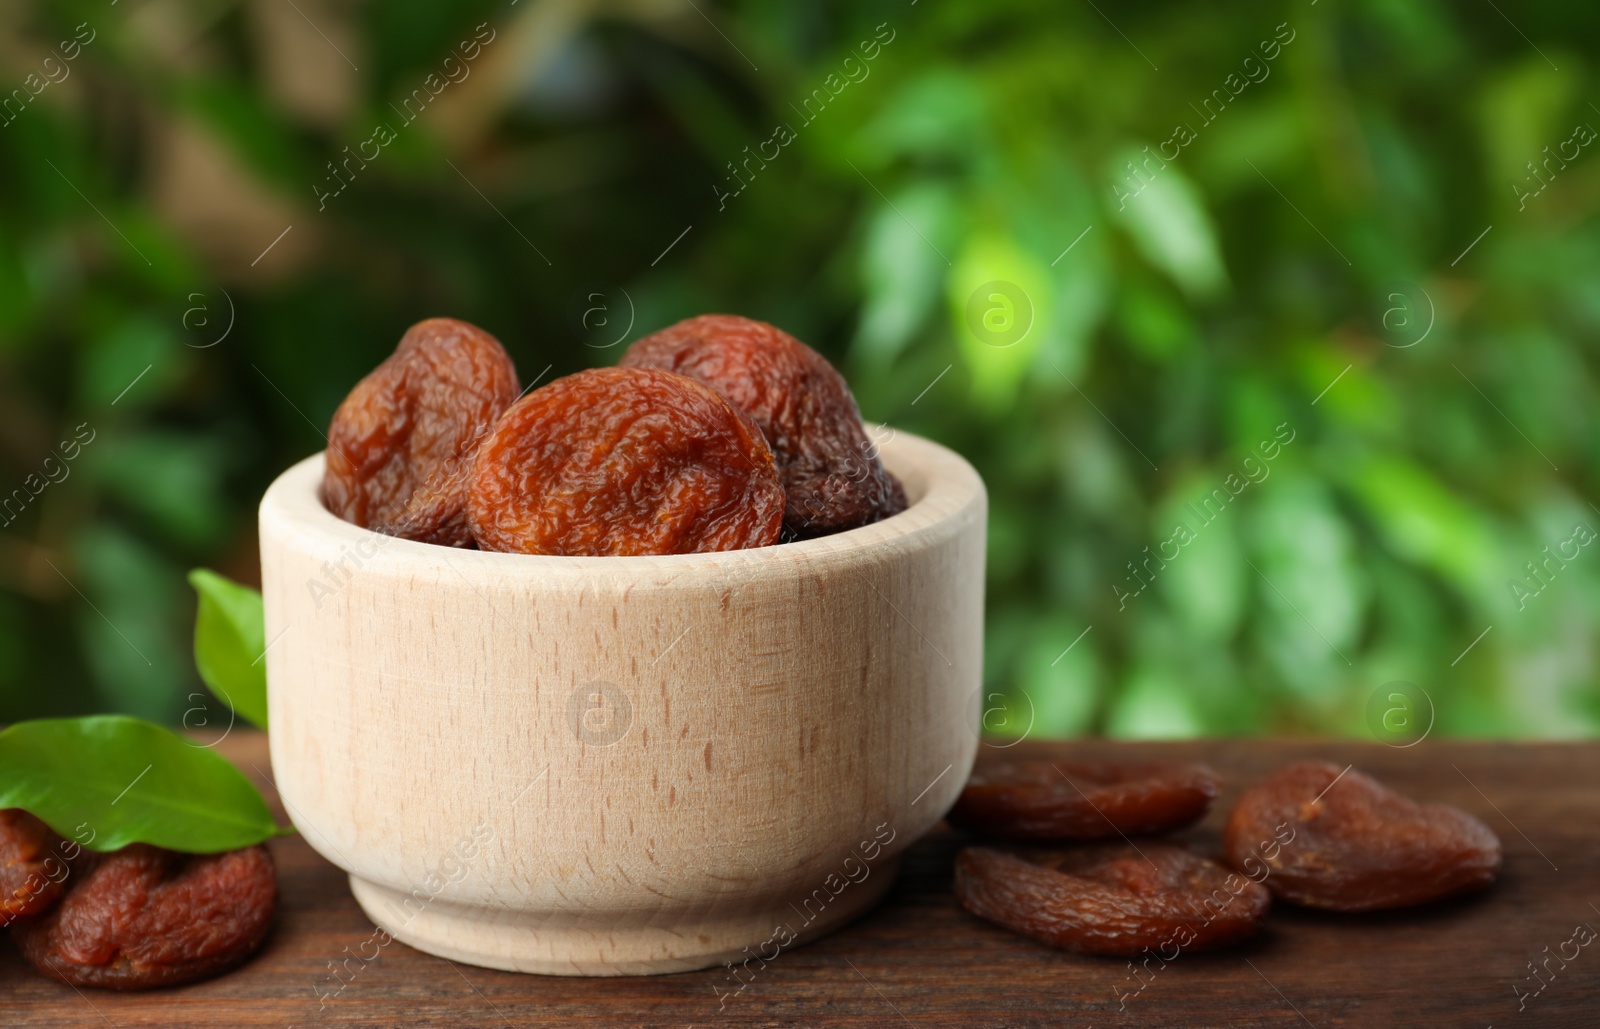 Photo of Bowl of tasty apricots on wooden table against blurred green background, space for text. Dried fruits